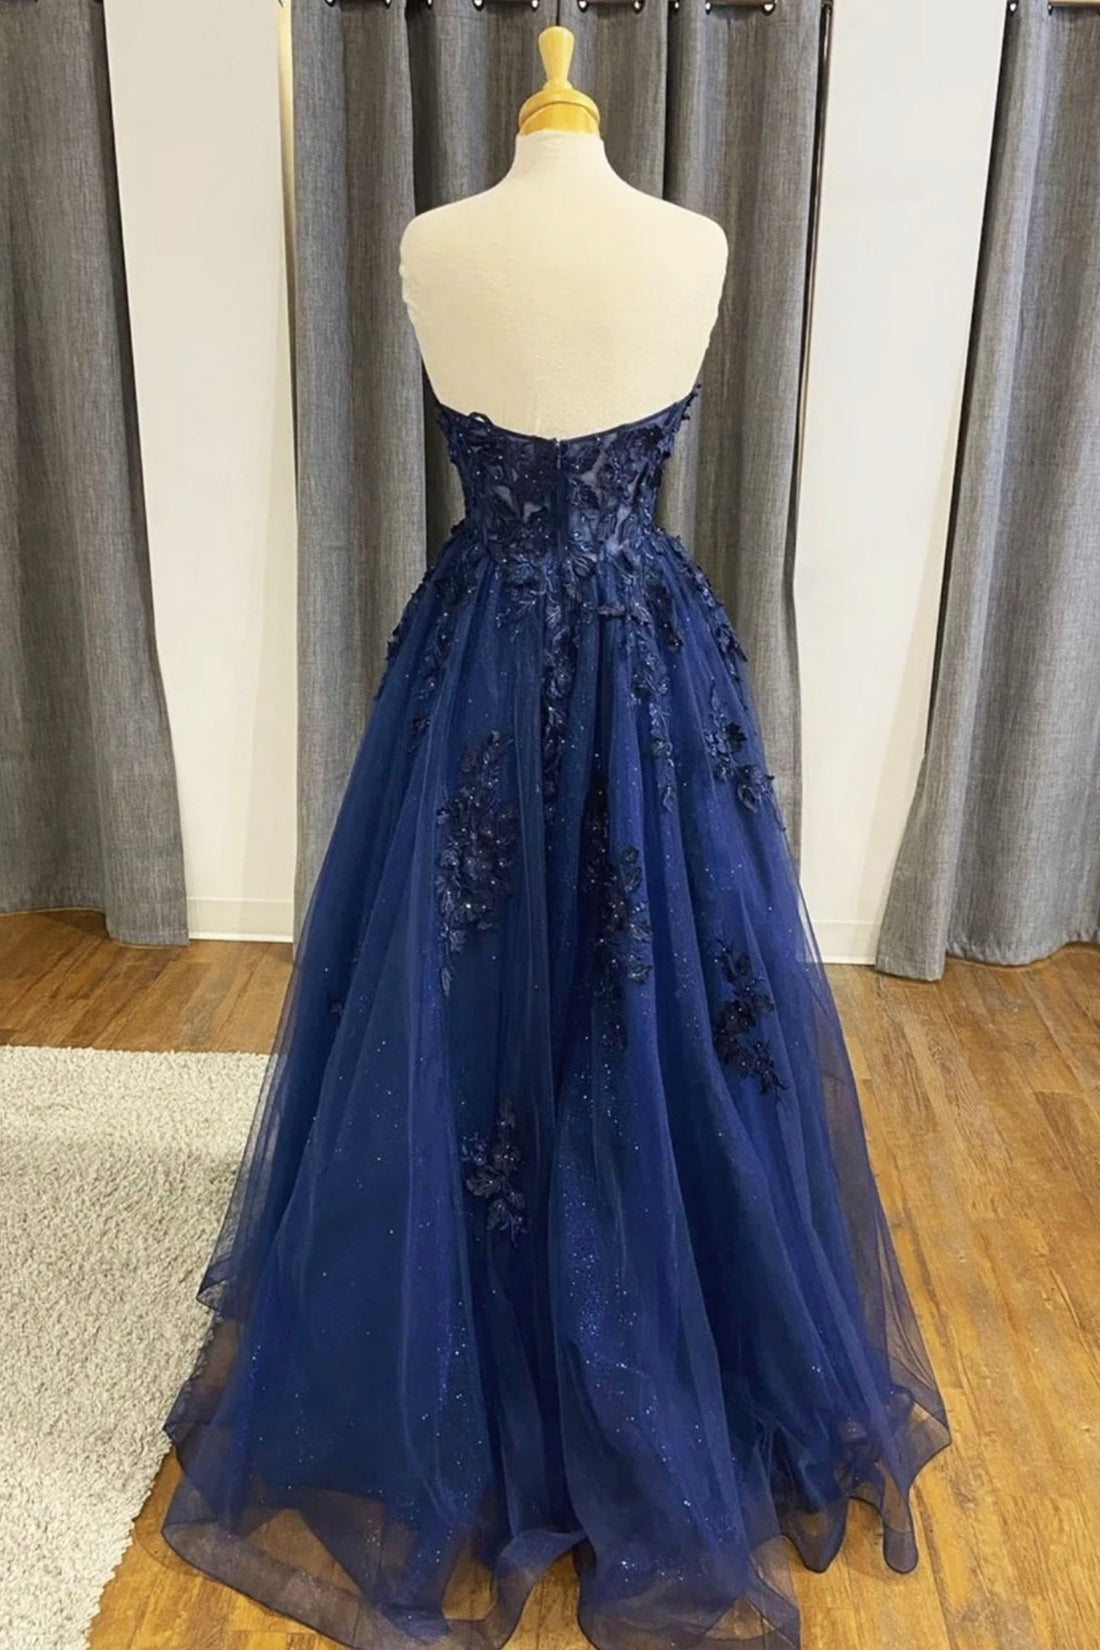 Party Dresses For Girl, Blue Strapless Lace Long Prom Dress, A-Line Evening Dress Party Dress